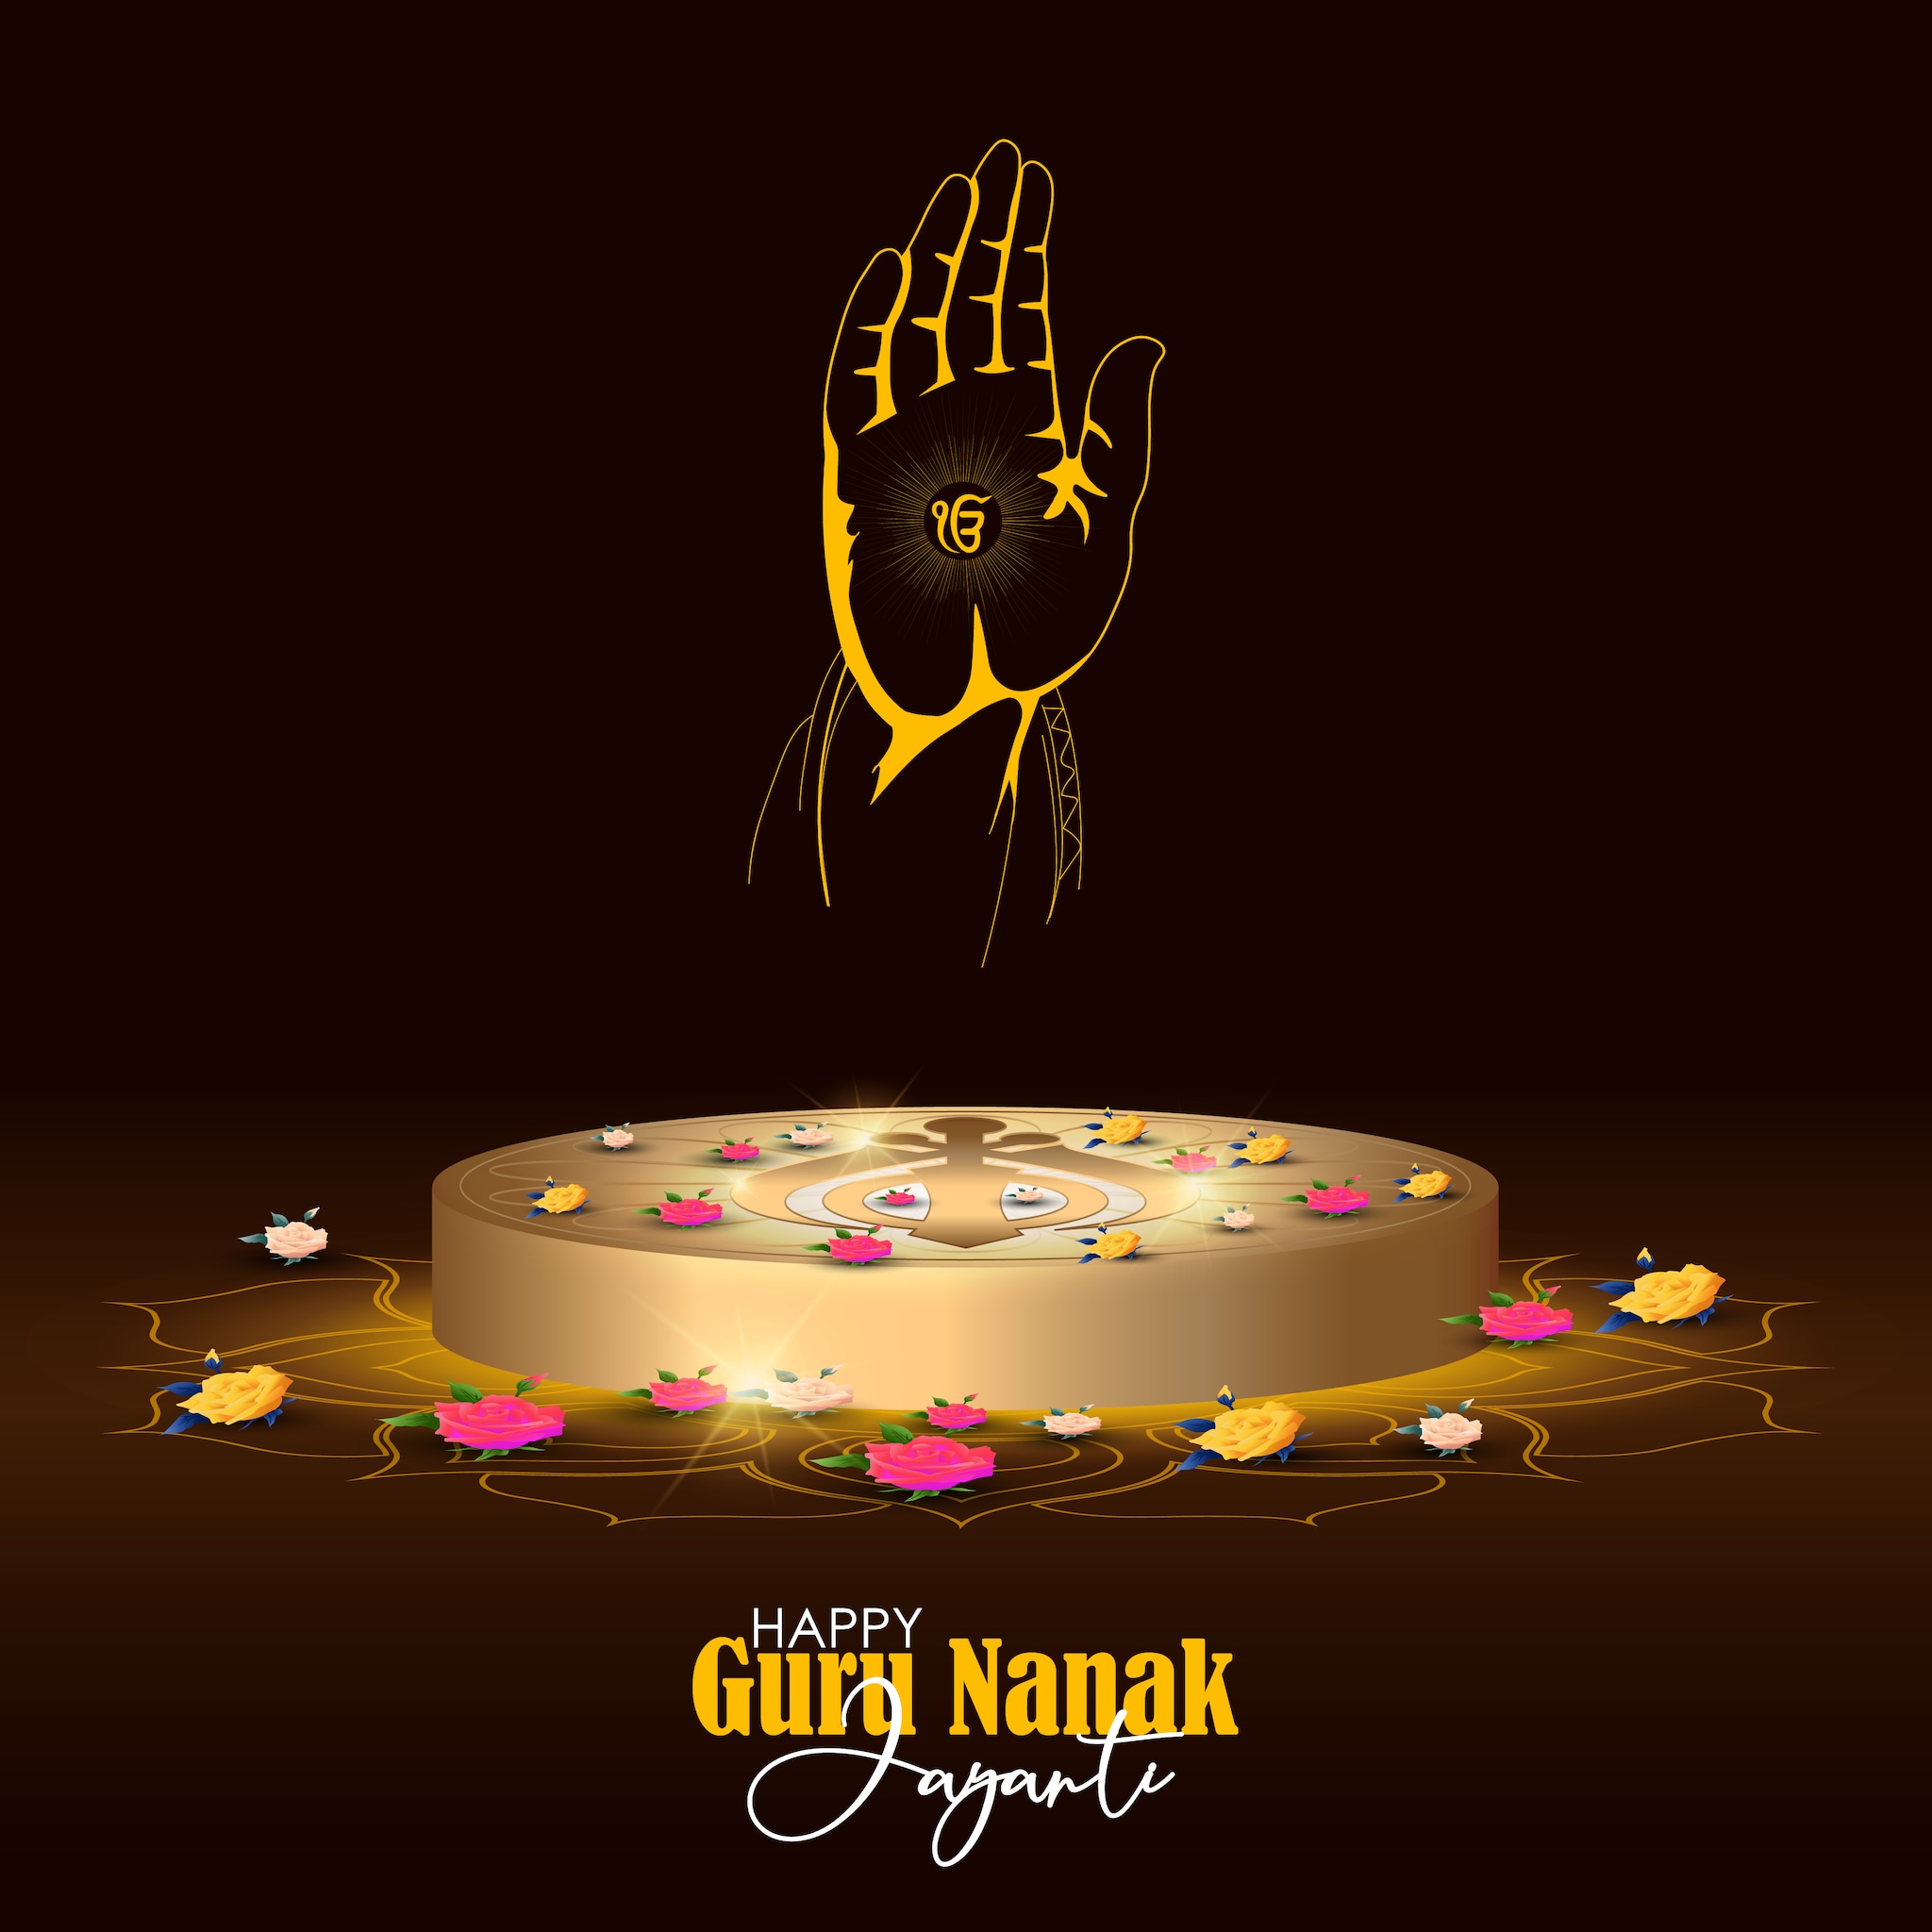 Guru Nanak Jayanti 2021 2021 Wallpaper, Wishes Images, Quotes, Status, Photos, Pics, SMS, Messages. (Image: Shutterstock)